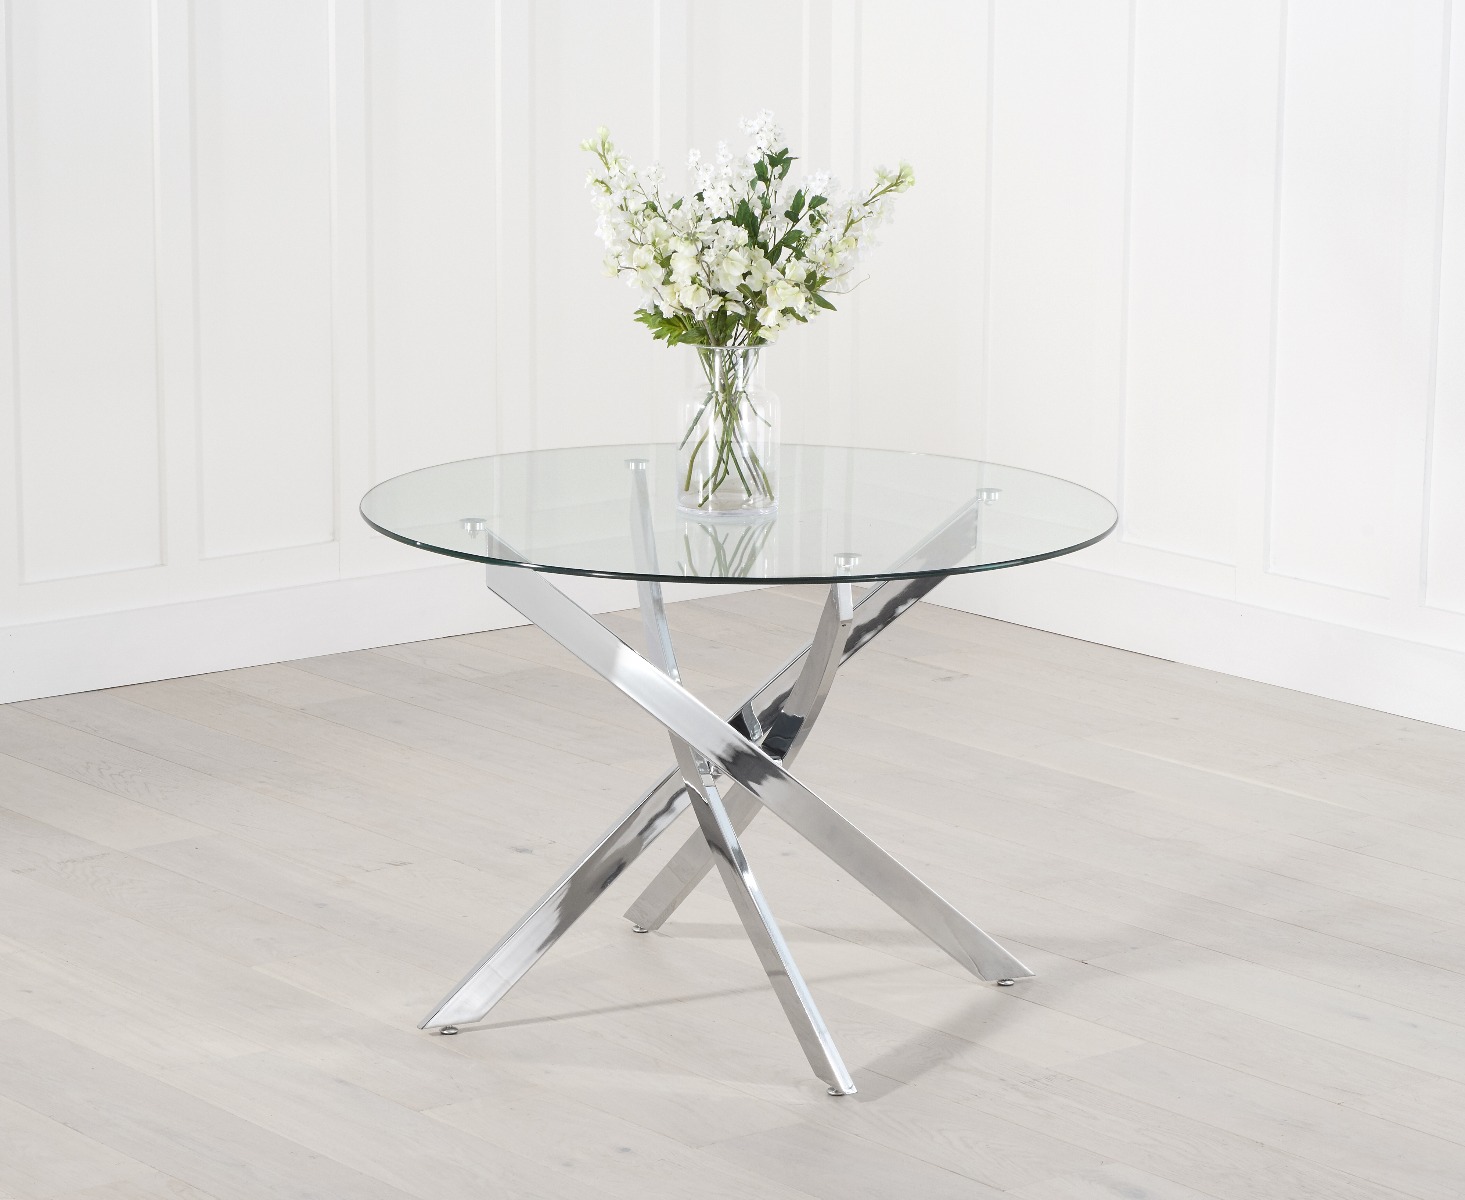 Photo 5 of Denver 120cm glass dining table with 4 grey vigo chairs